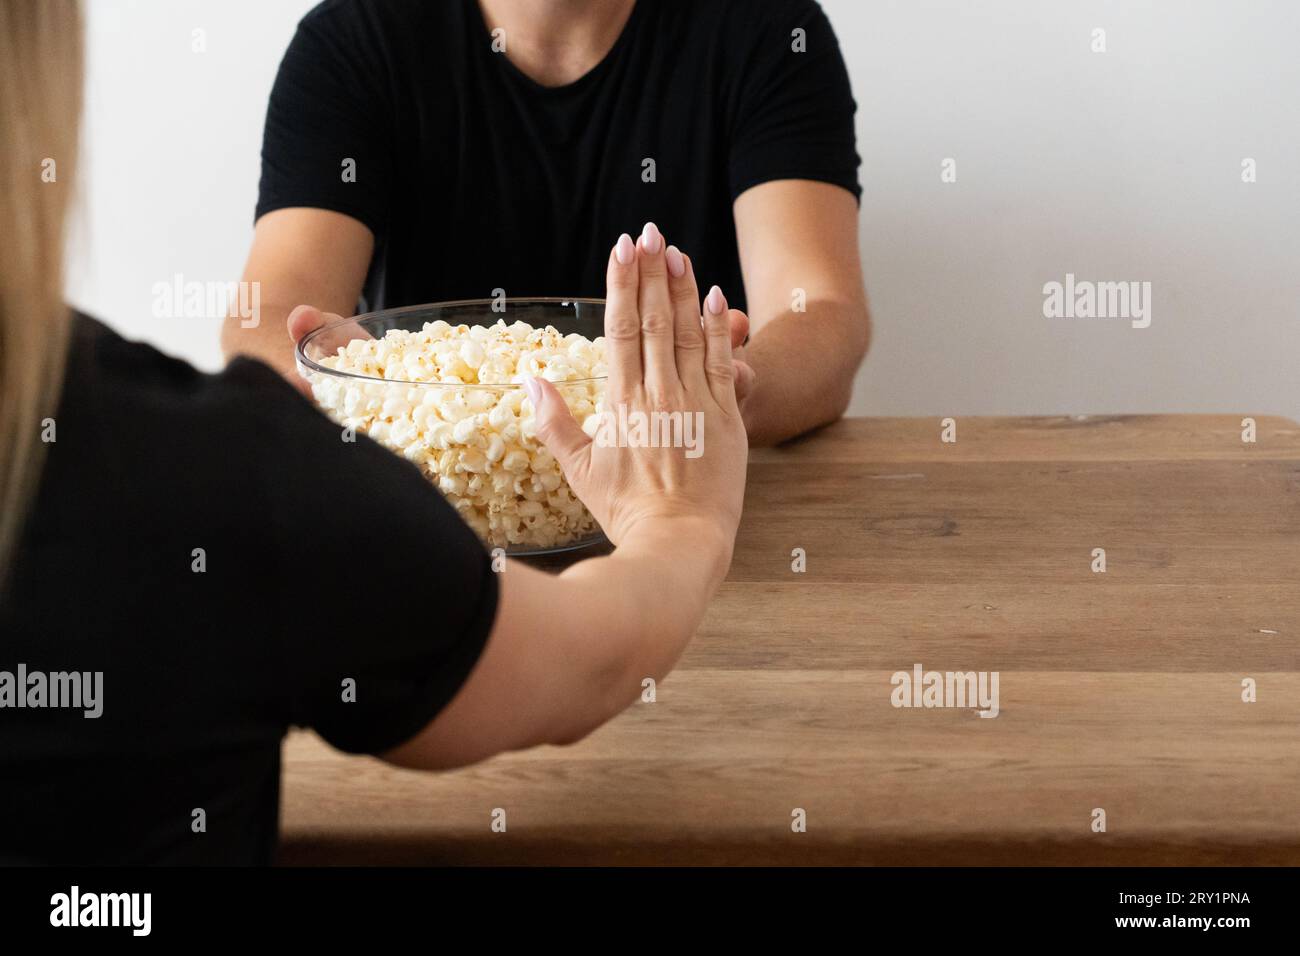 Woman Declining Popcorn: Avoiding Unhealthy Fatty, Salty Snacks, Snack Avoidance, Ketogenic Diet, Carnivore Diet, Low-Carb Diet, Non-Consumption of Co Stock Photo